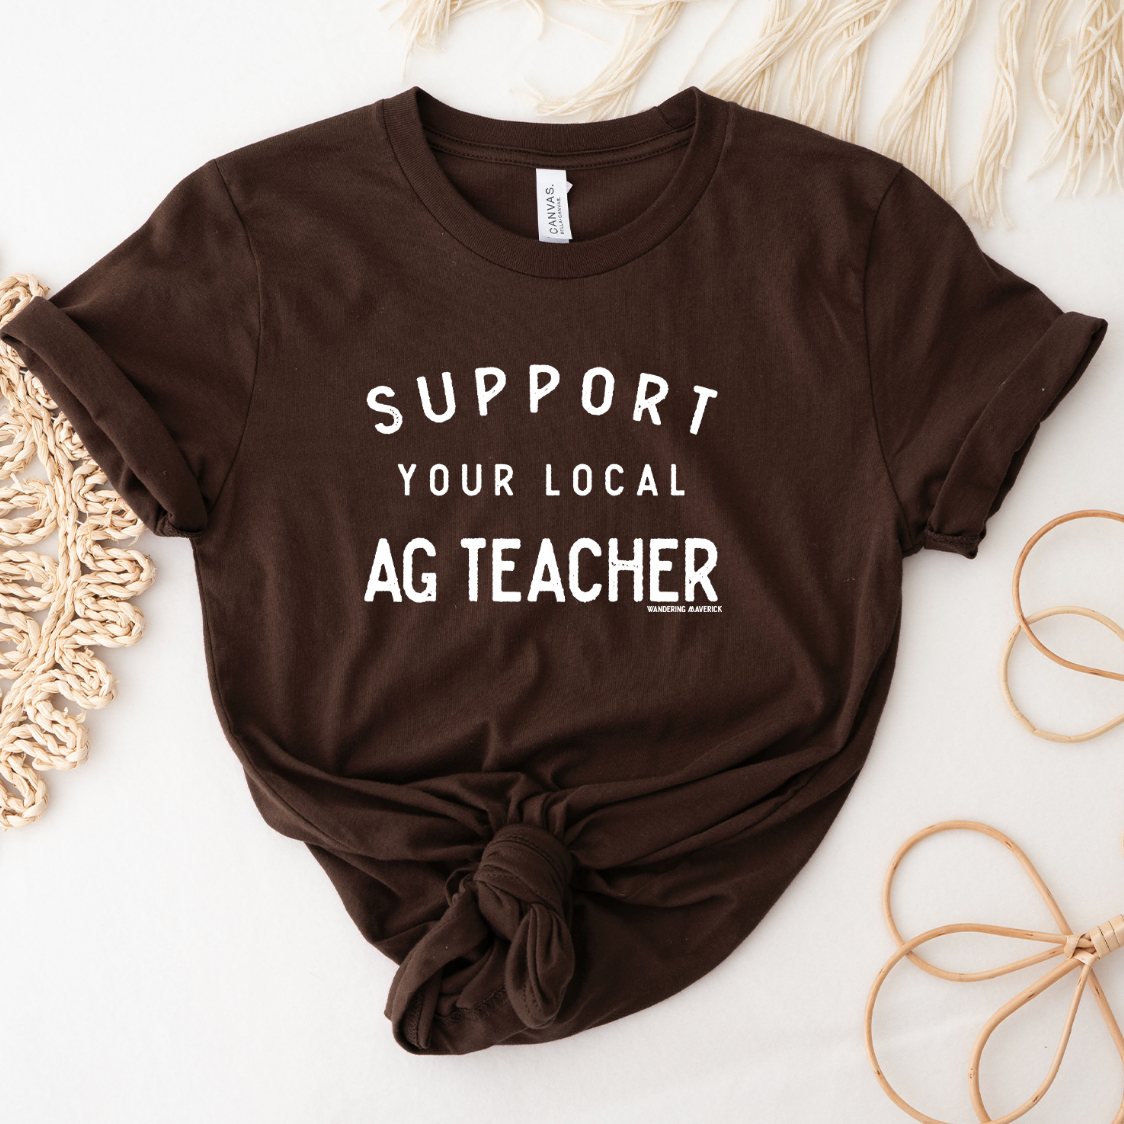 Support Your Local AG Teacher White Ink T-Shirt (XS-4XL) - Multiple Colors!